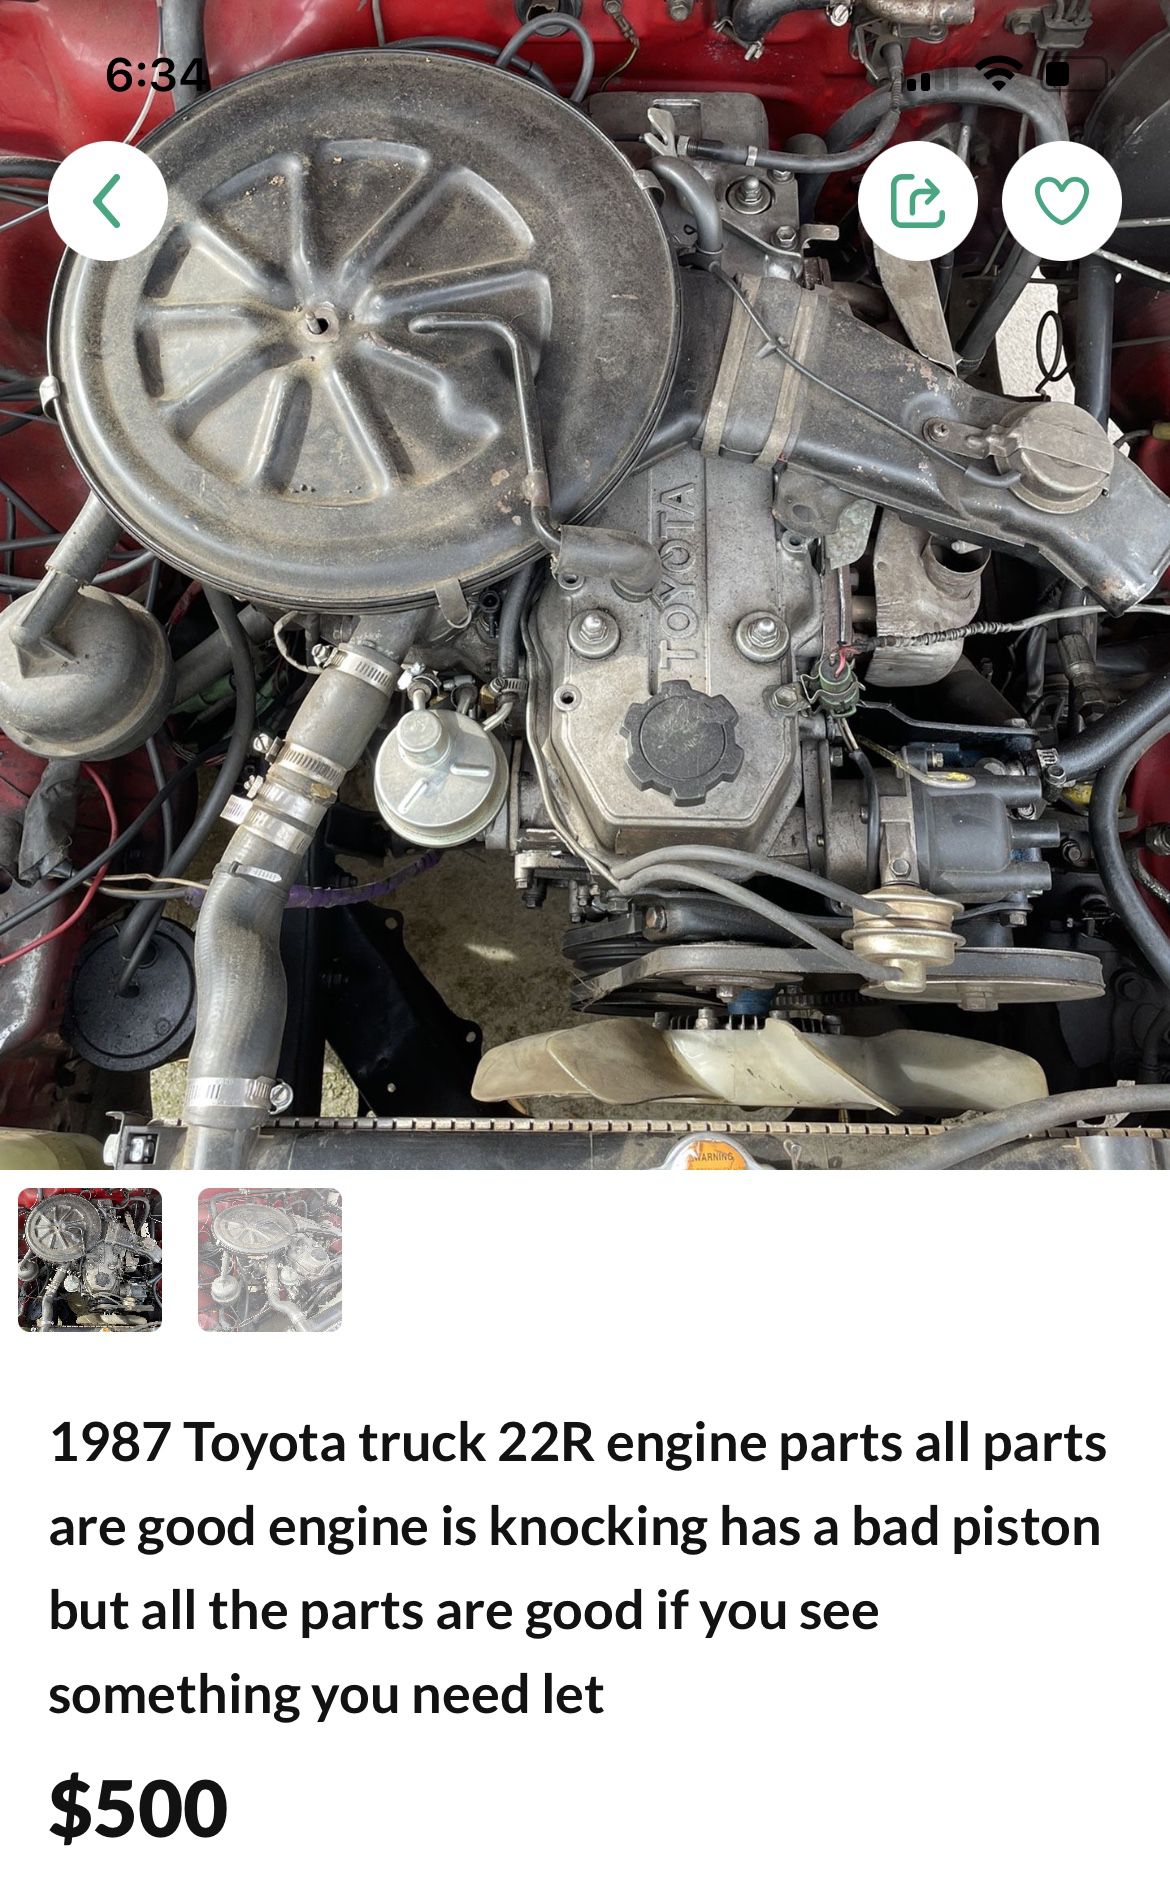 1987 Toyota truck 22R engine parts all parts are good engine is knocking has a bad piston but all the parts are good if you see something you need let